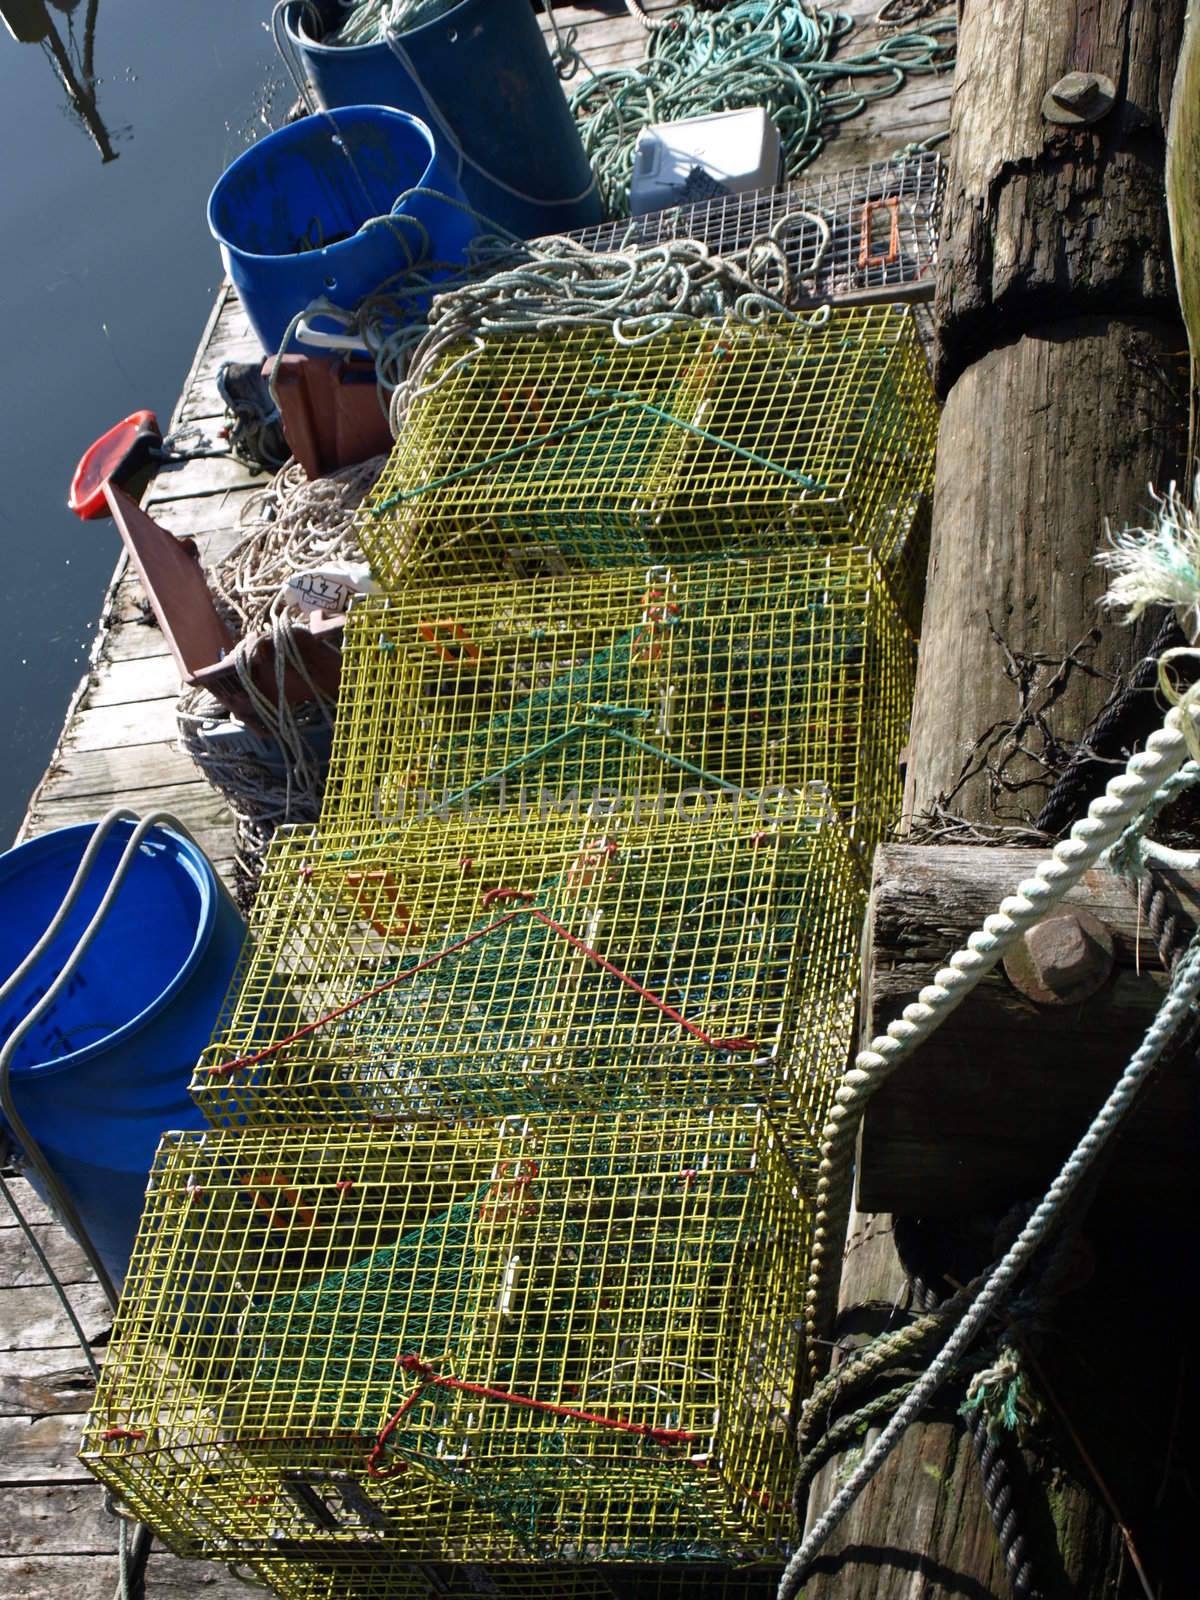 lobster traps along the dock in Portland, Maine during the summer